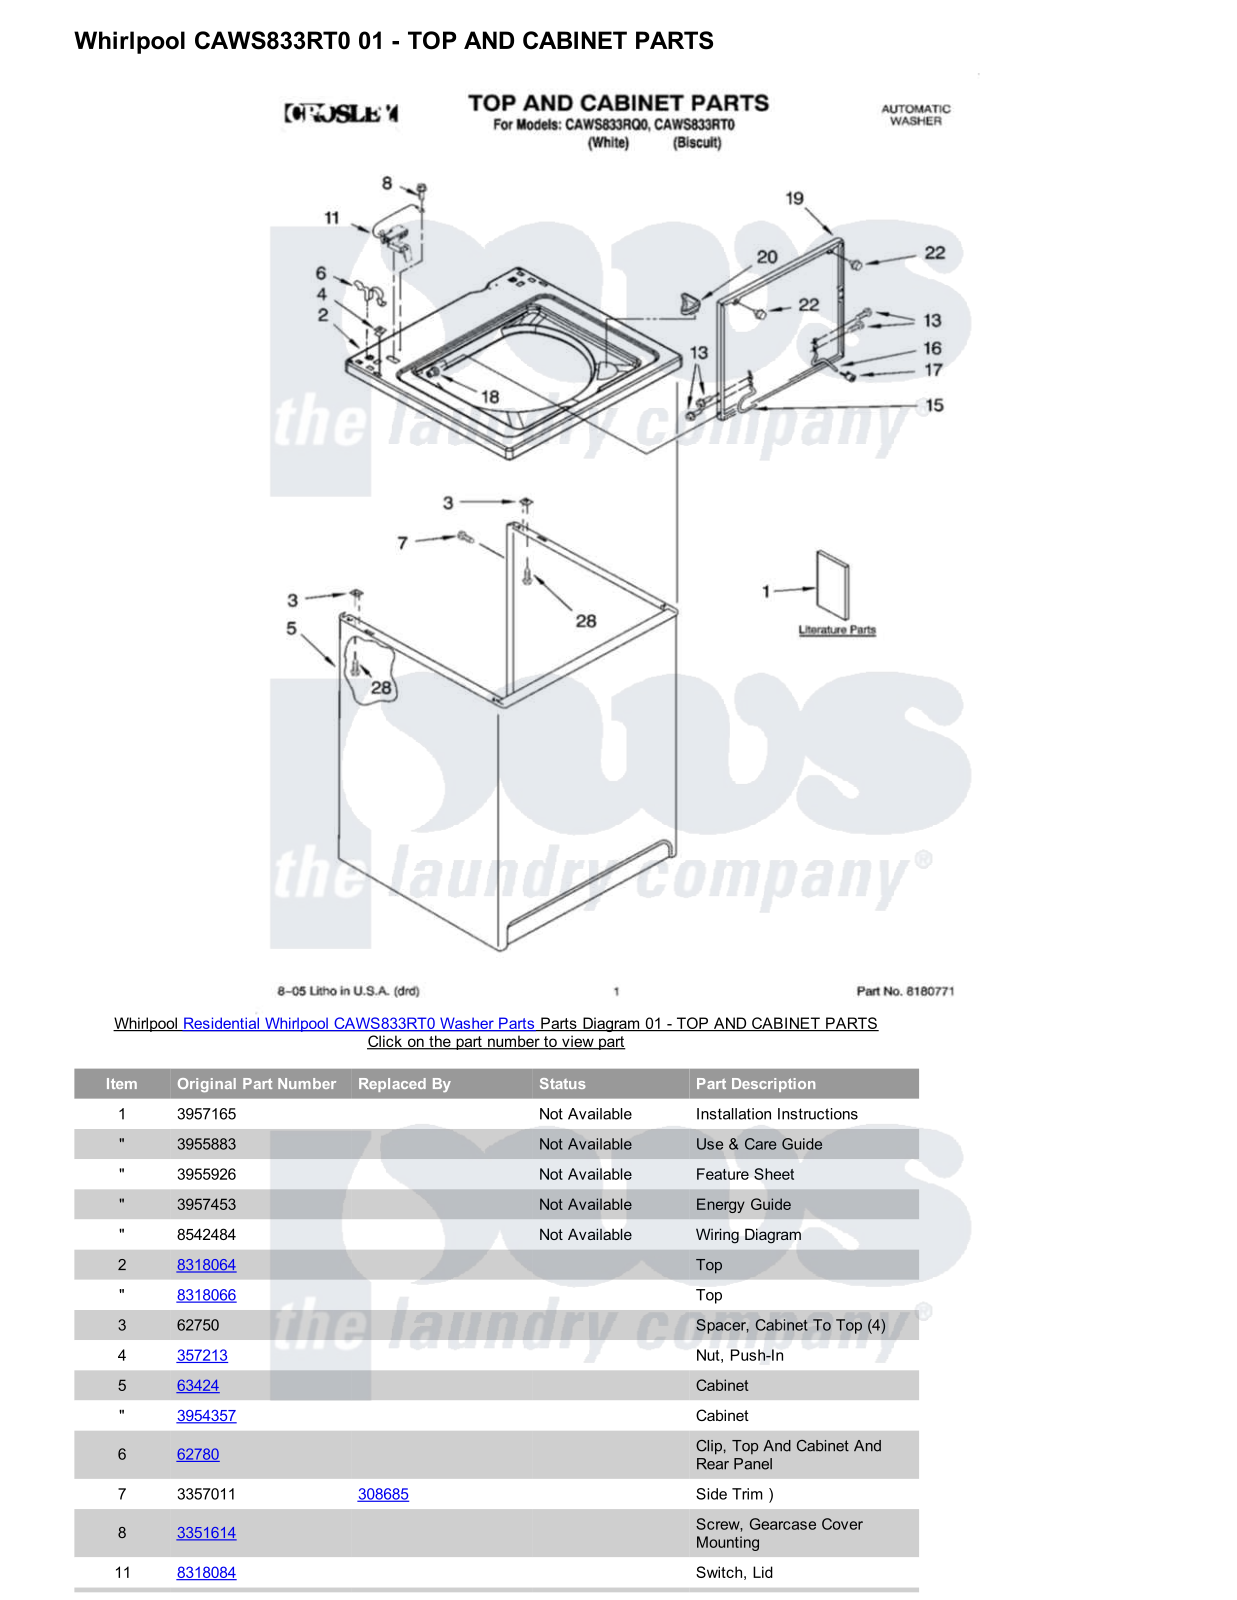 Whirlpool CAWS833RT0 Parts Diagram